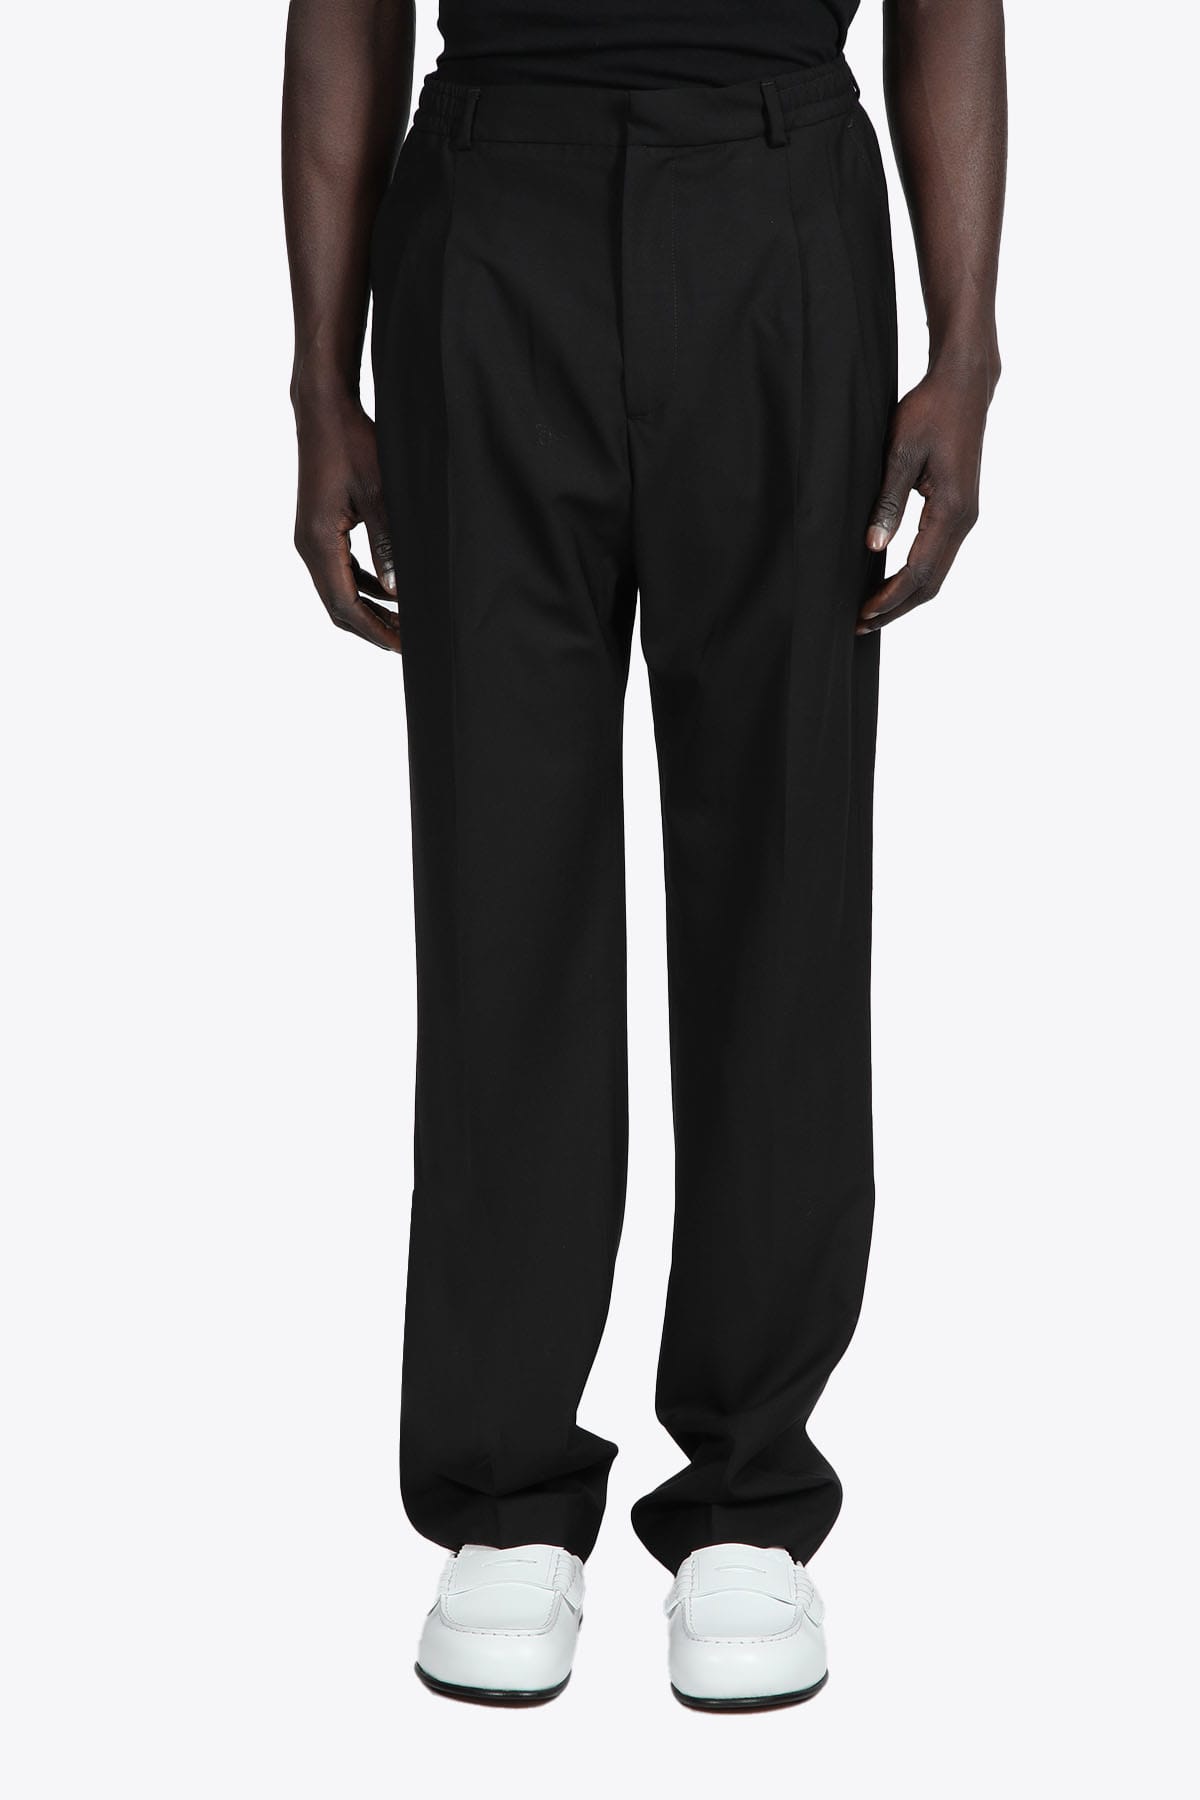 CMMN SWDN Double Pleated Trs W/elasticated Waist Relaxed Fit Black double pleated tailored pant - Jez